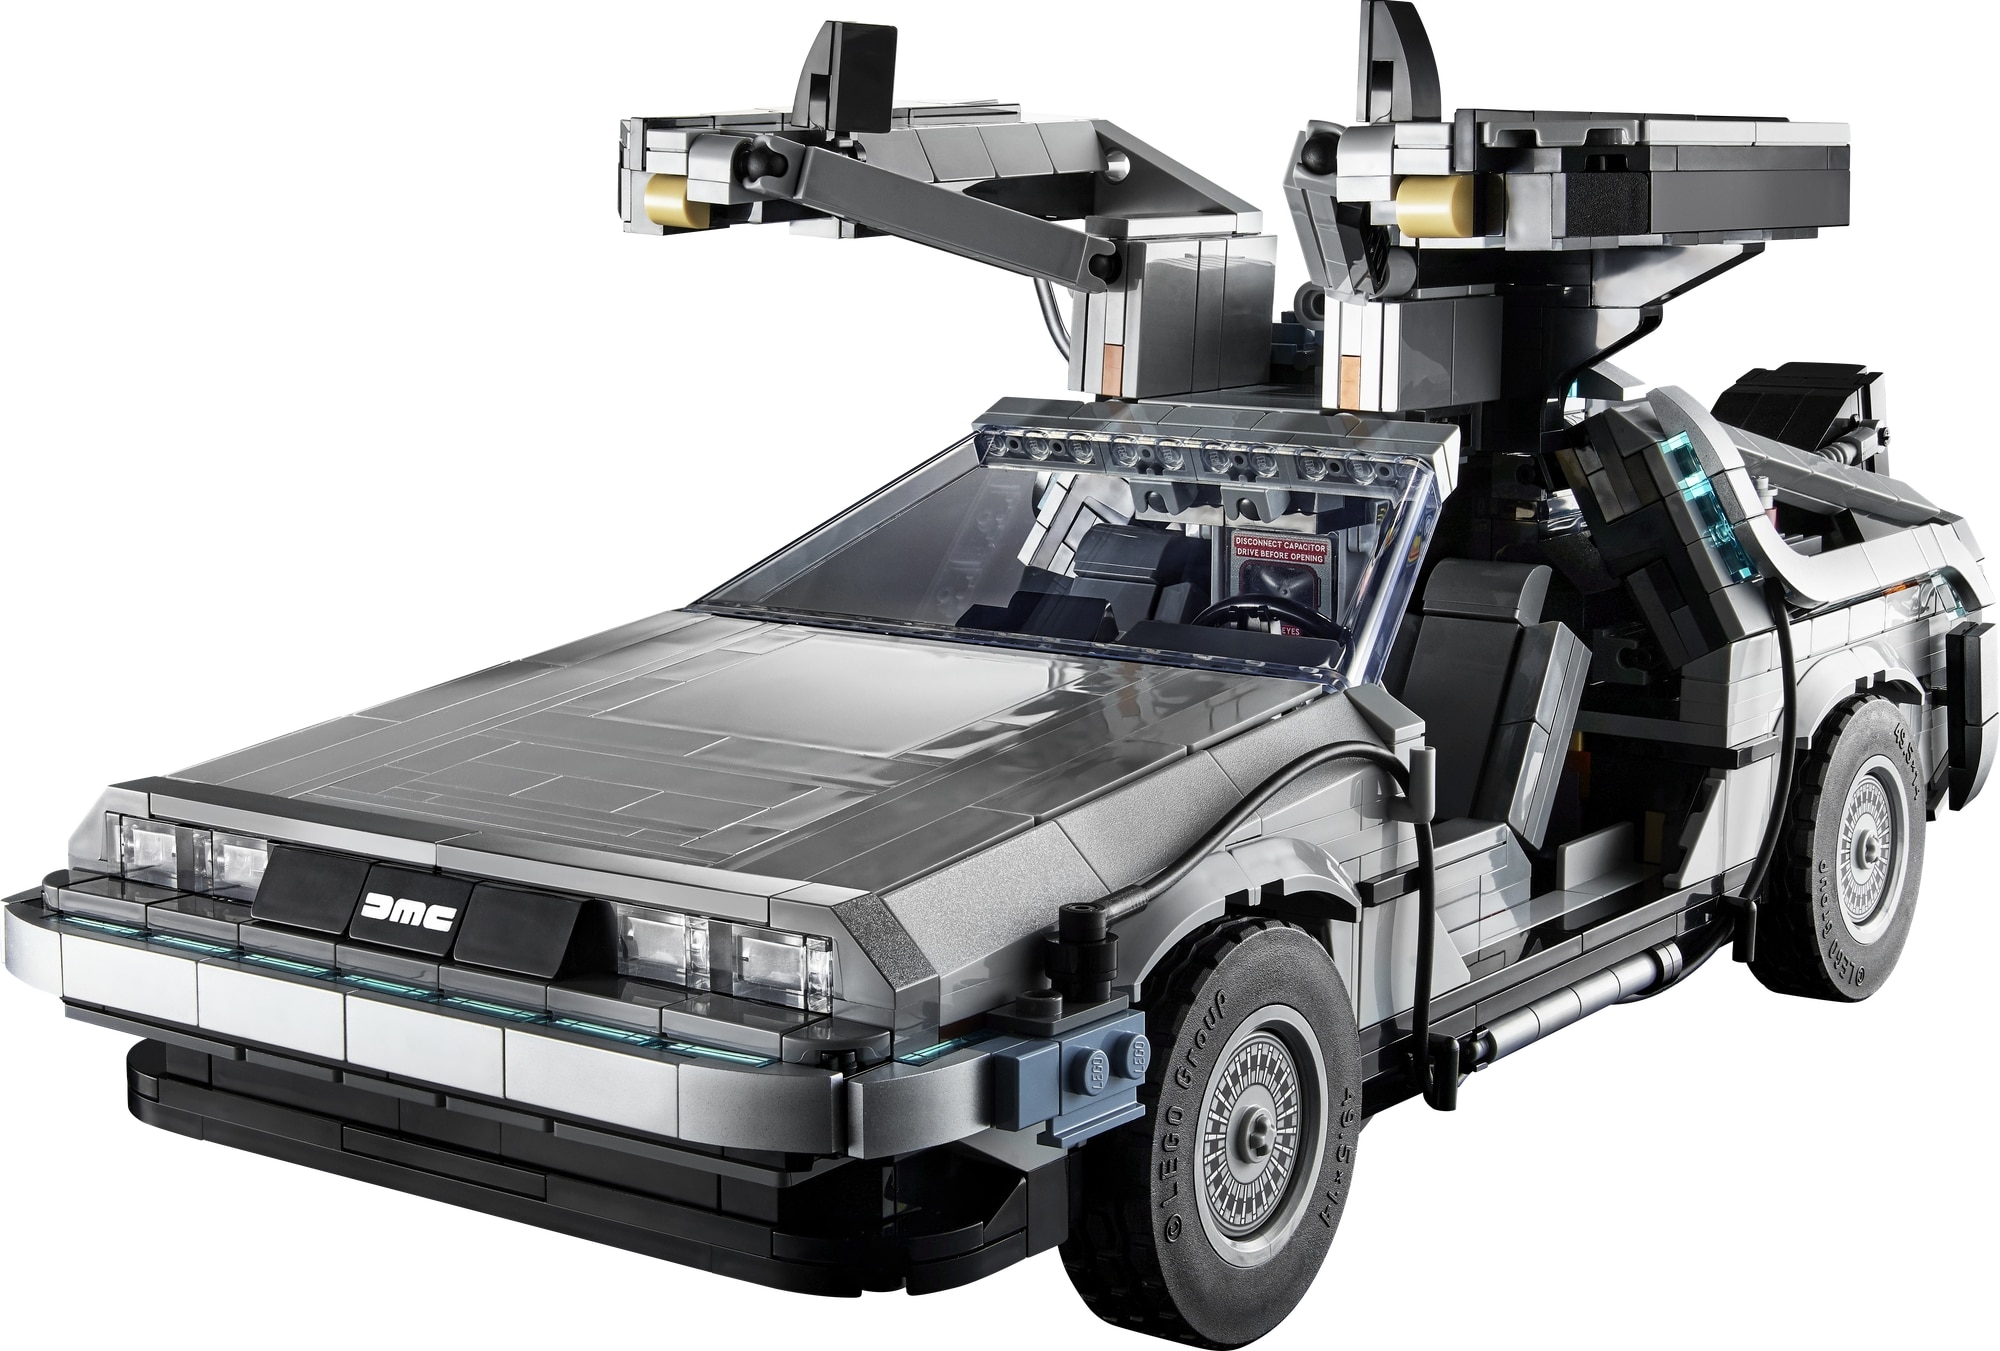 LEGO 10300 Delorean DMC-12 Back to the Future Revealed | New for April 1st 2022